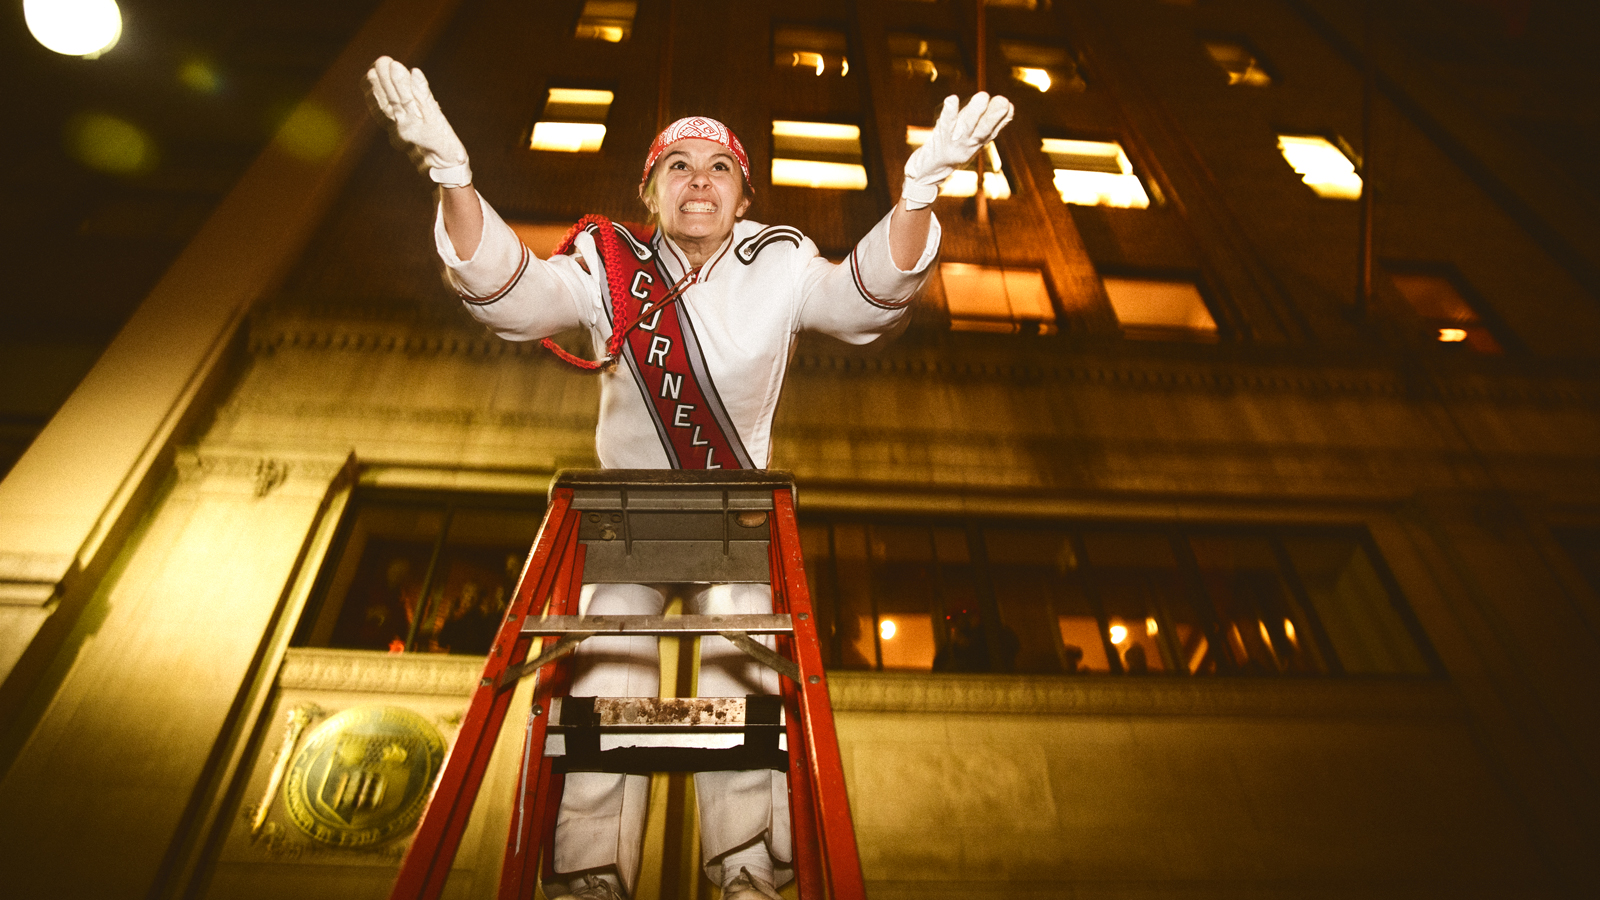 Drum major directs Big Red Marching Band from ladder outside Cornell Club in New York City